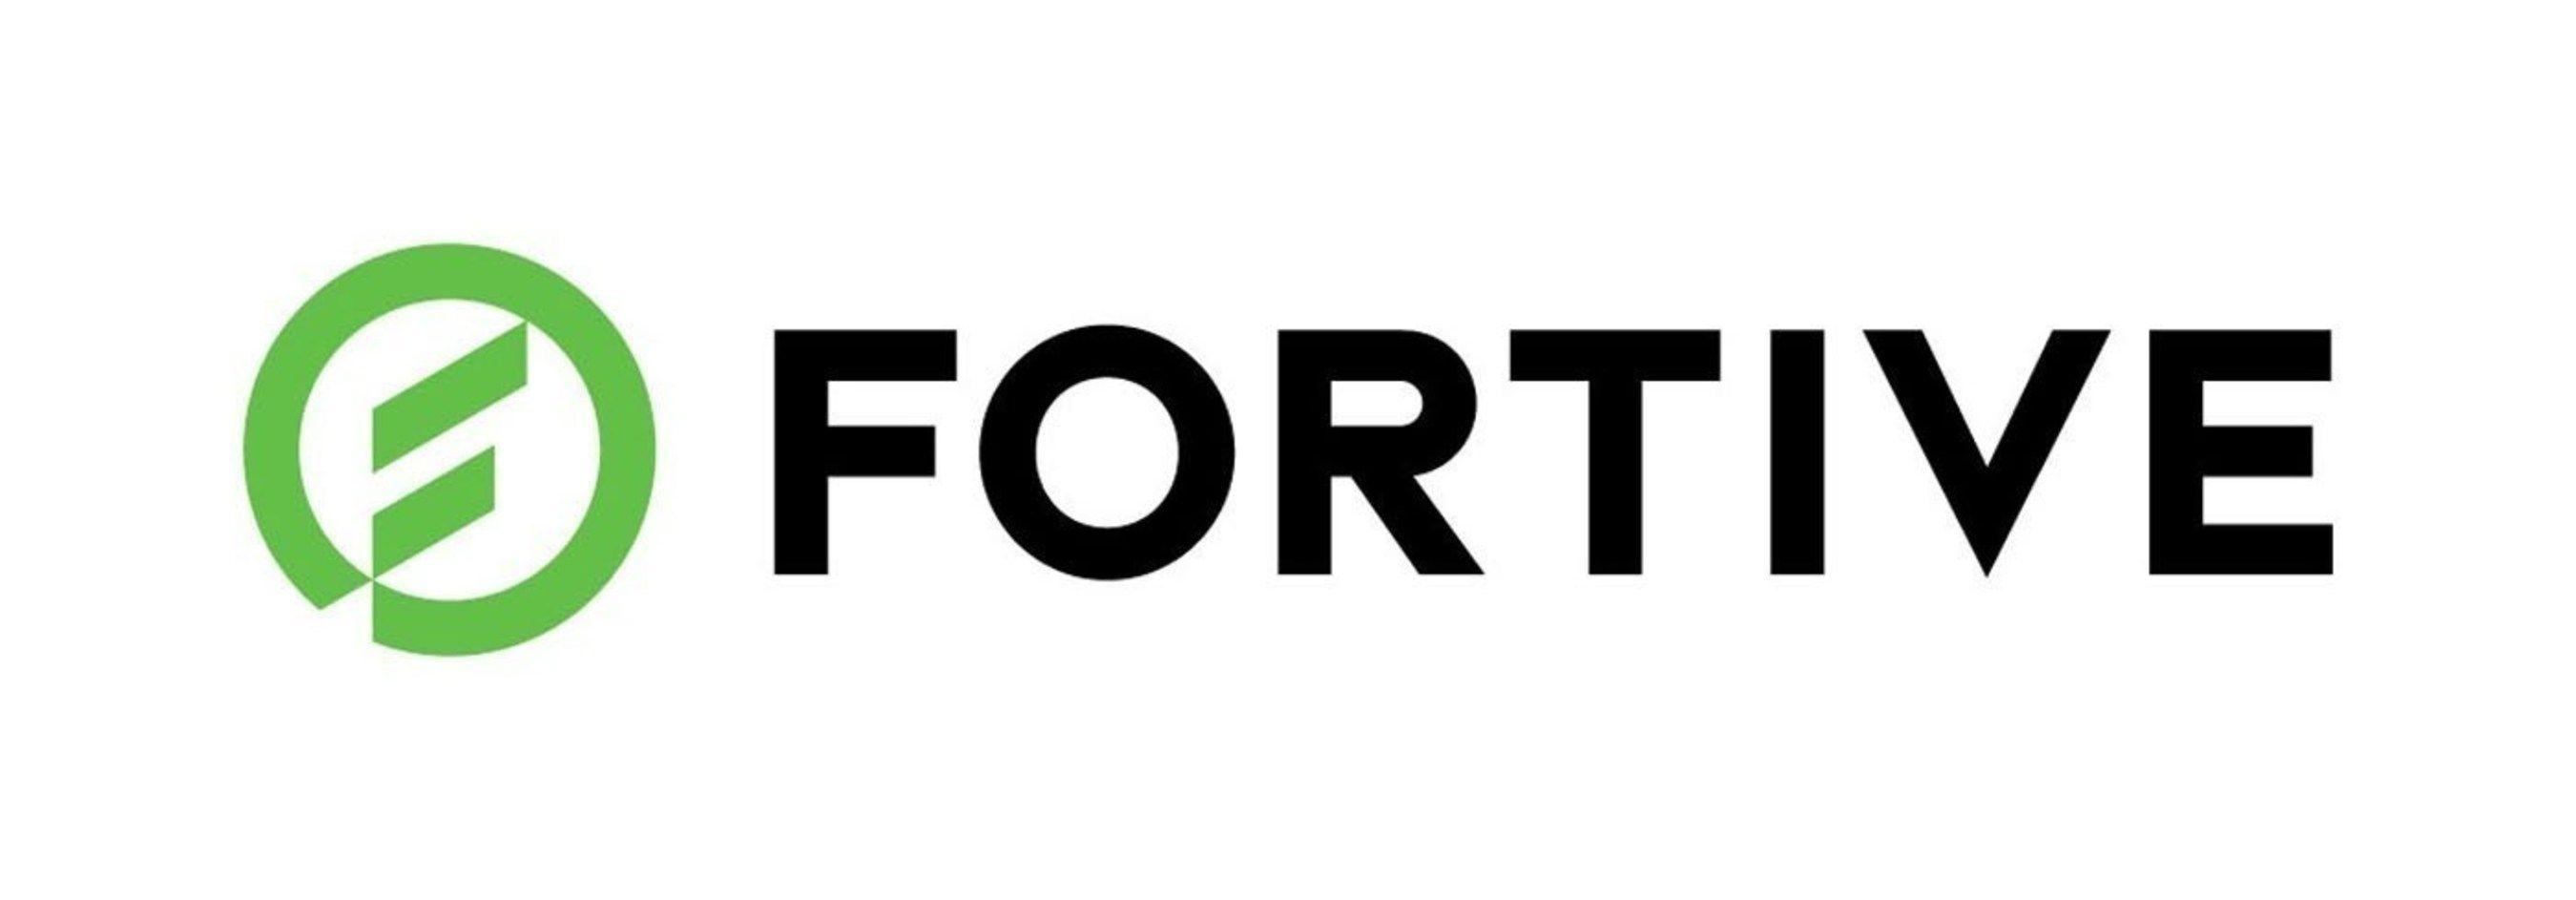 Fortive Logo - Danaher Announces New Diversified Industrial Growth Company To Be ...